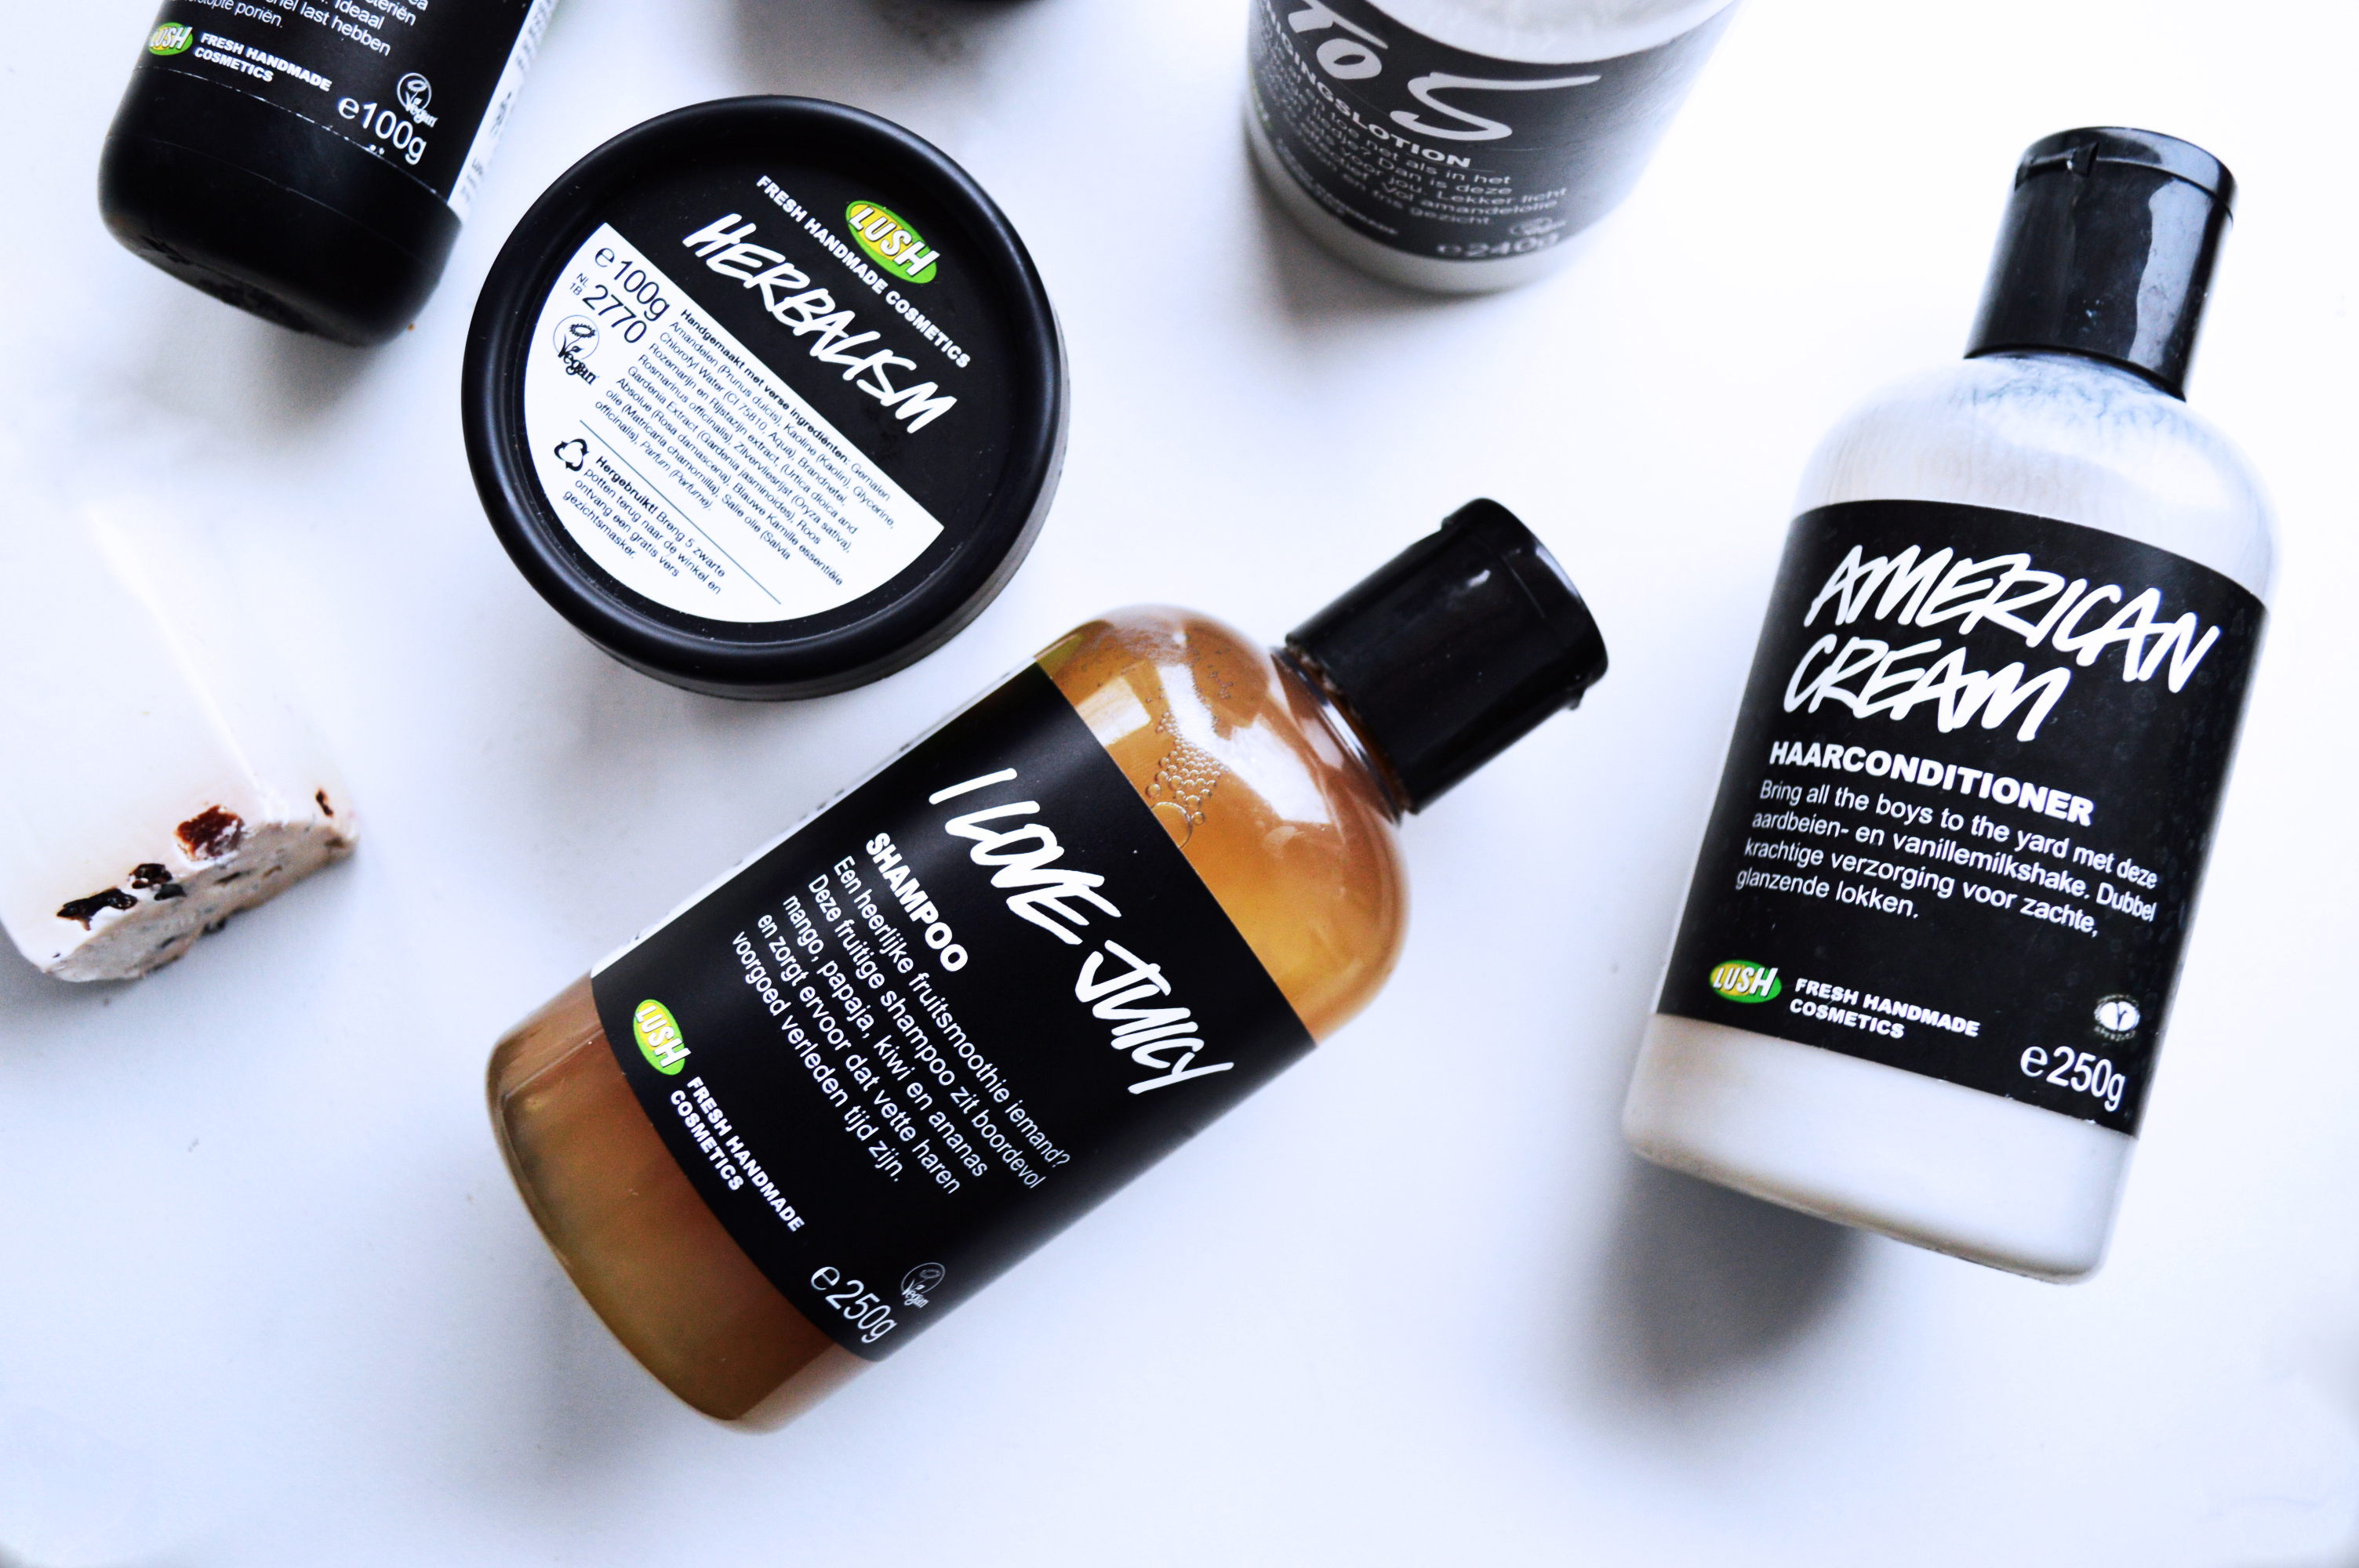 Lushproducts